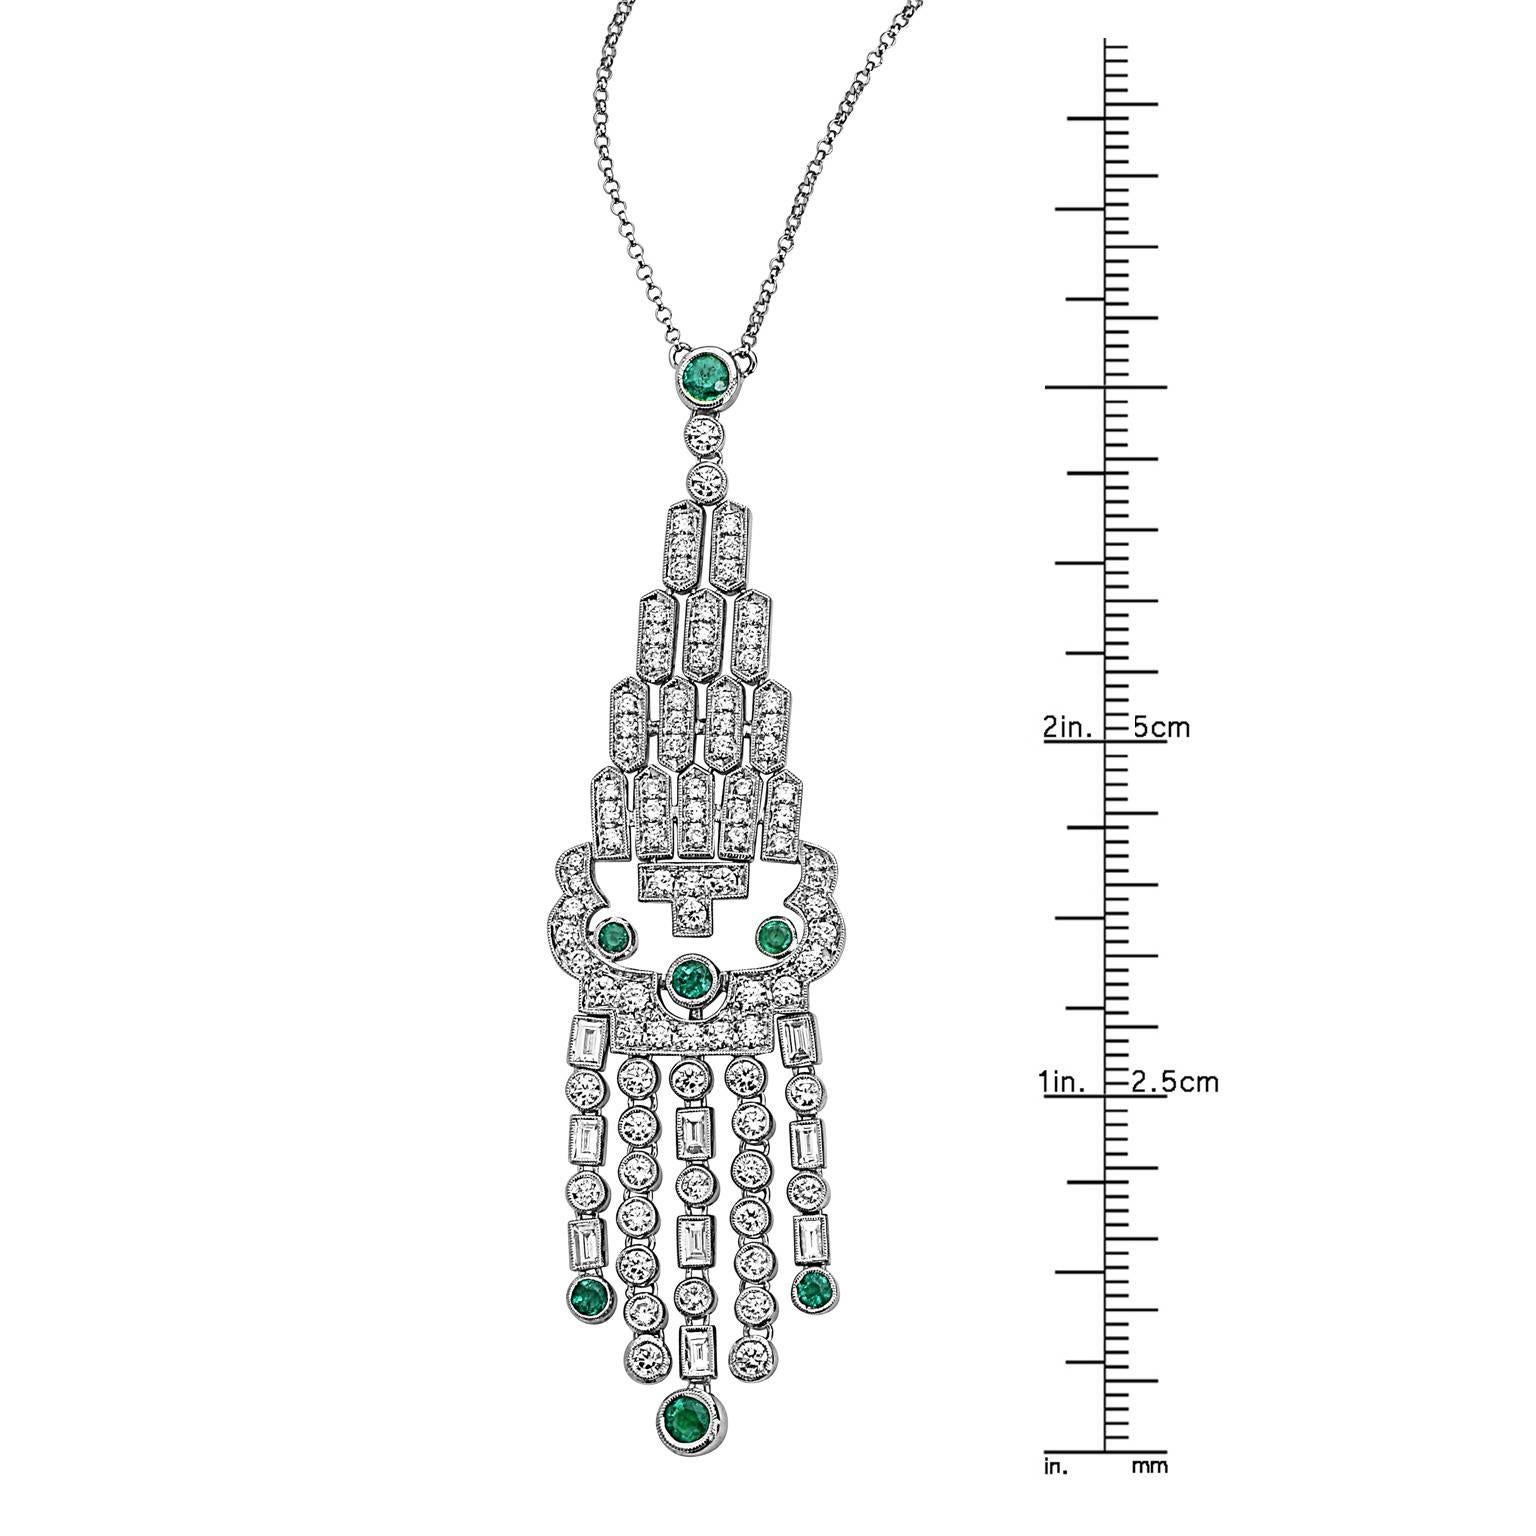 Approx total weight: 3.20cts
Diamond Weight:2.20ct
Emerald weight: 1.00ct
Diamond Color: E
Diamond Clarity: Vvs 
Cut: Excellent 
18